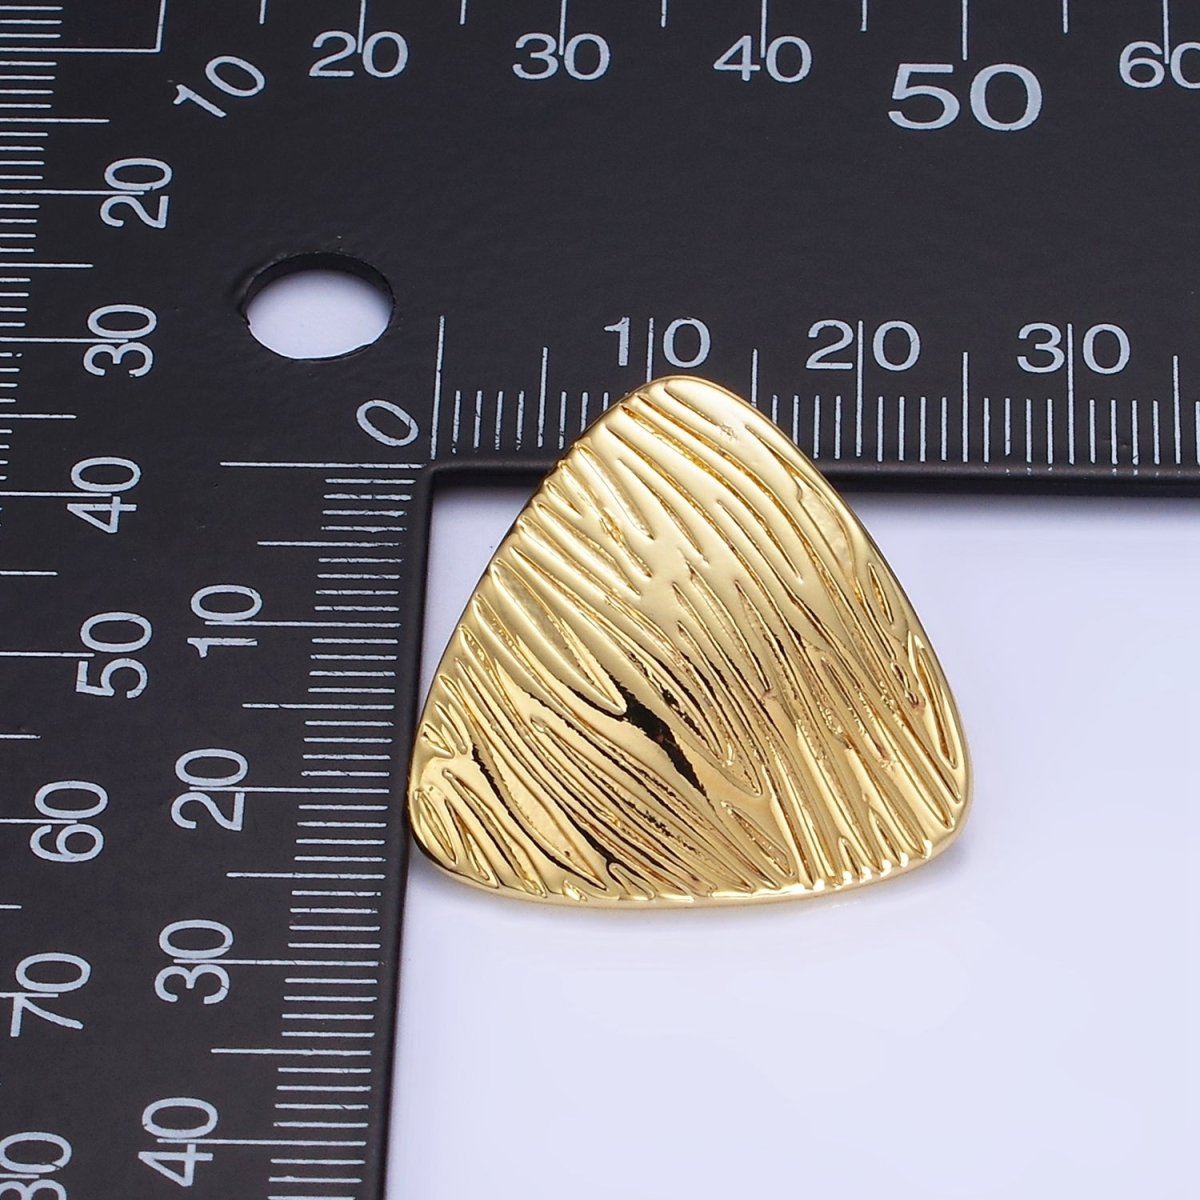 14K Gold Filled 24.3mm Line-Textured Triangle Stud Earrings | P470 - DLUXCA